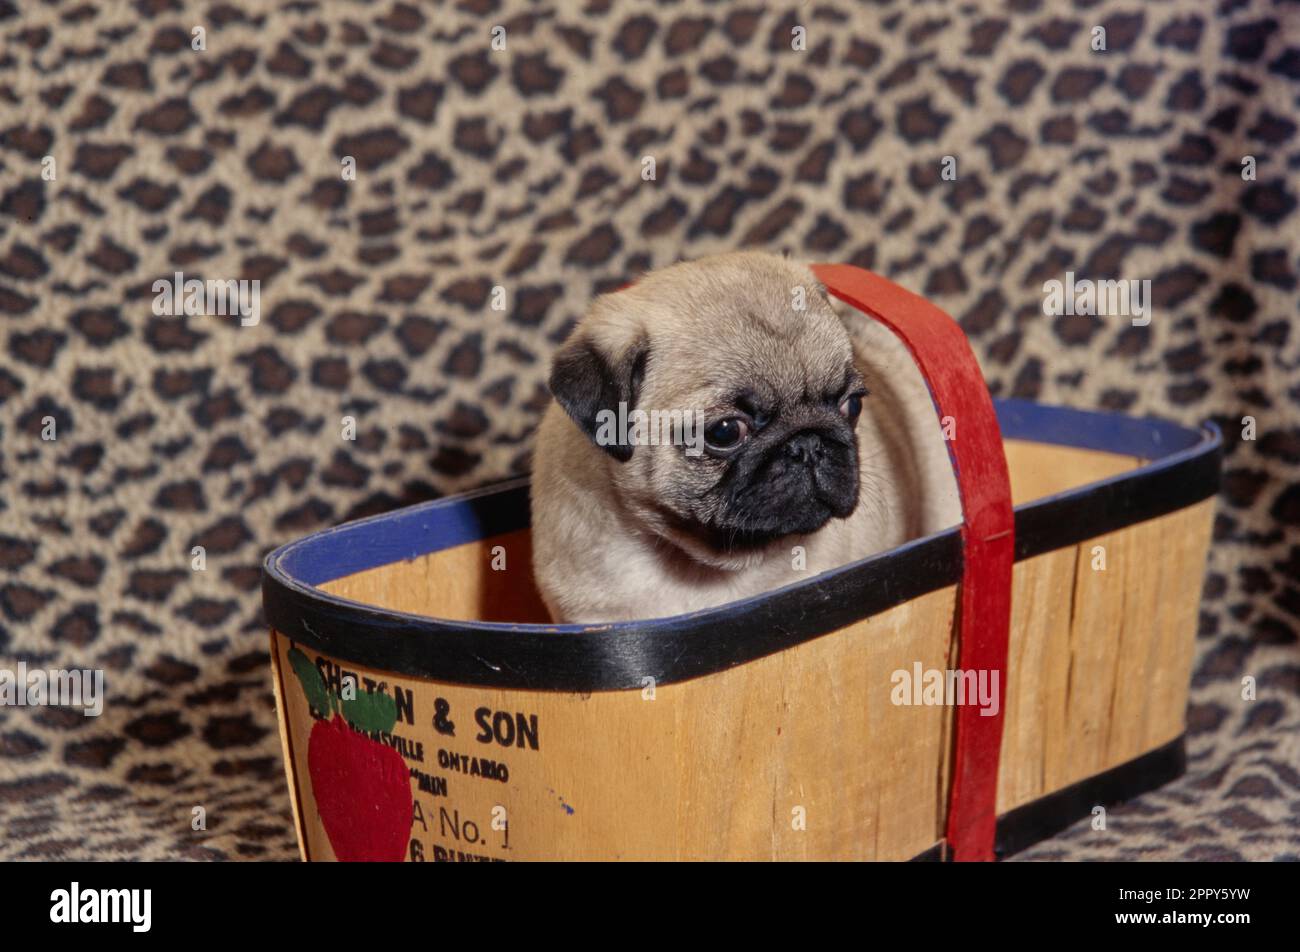 Pug puppy in basket sitting on leopard pattern blanket with red handle and apple design Stock Photo